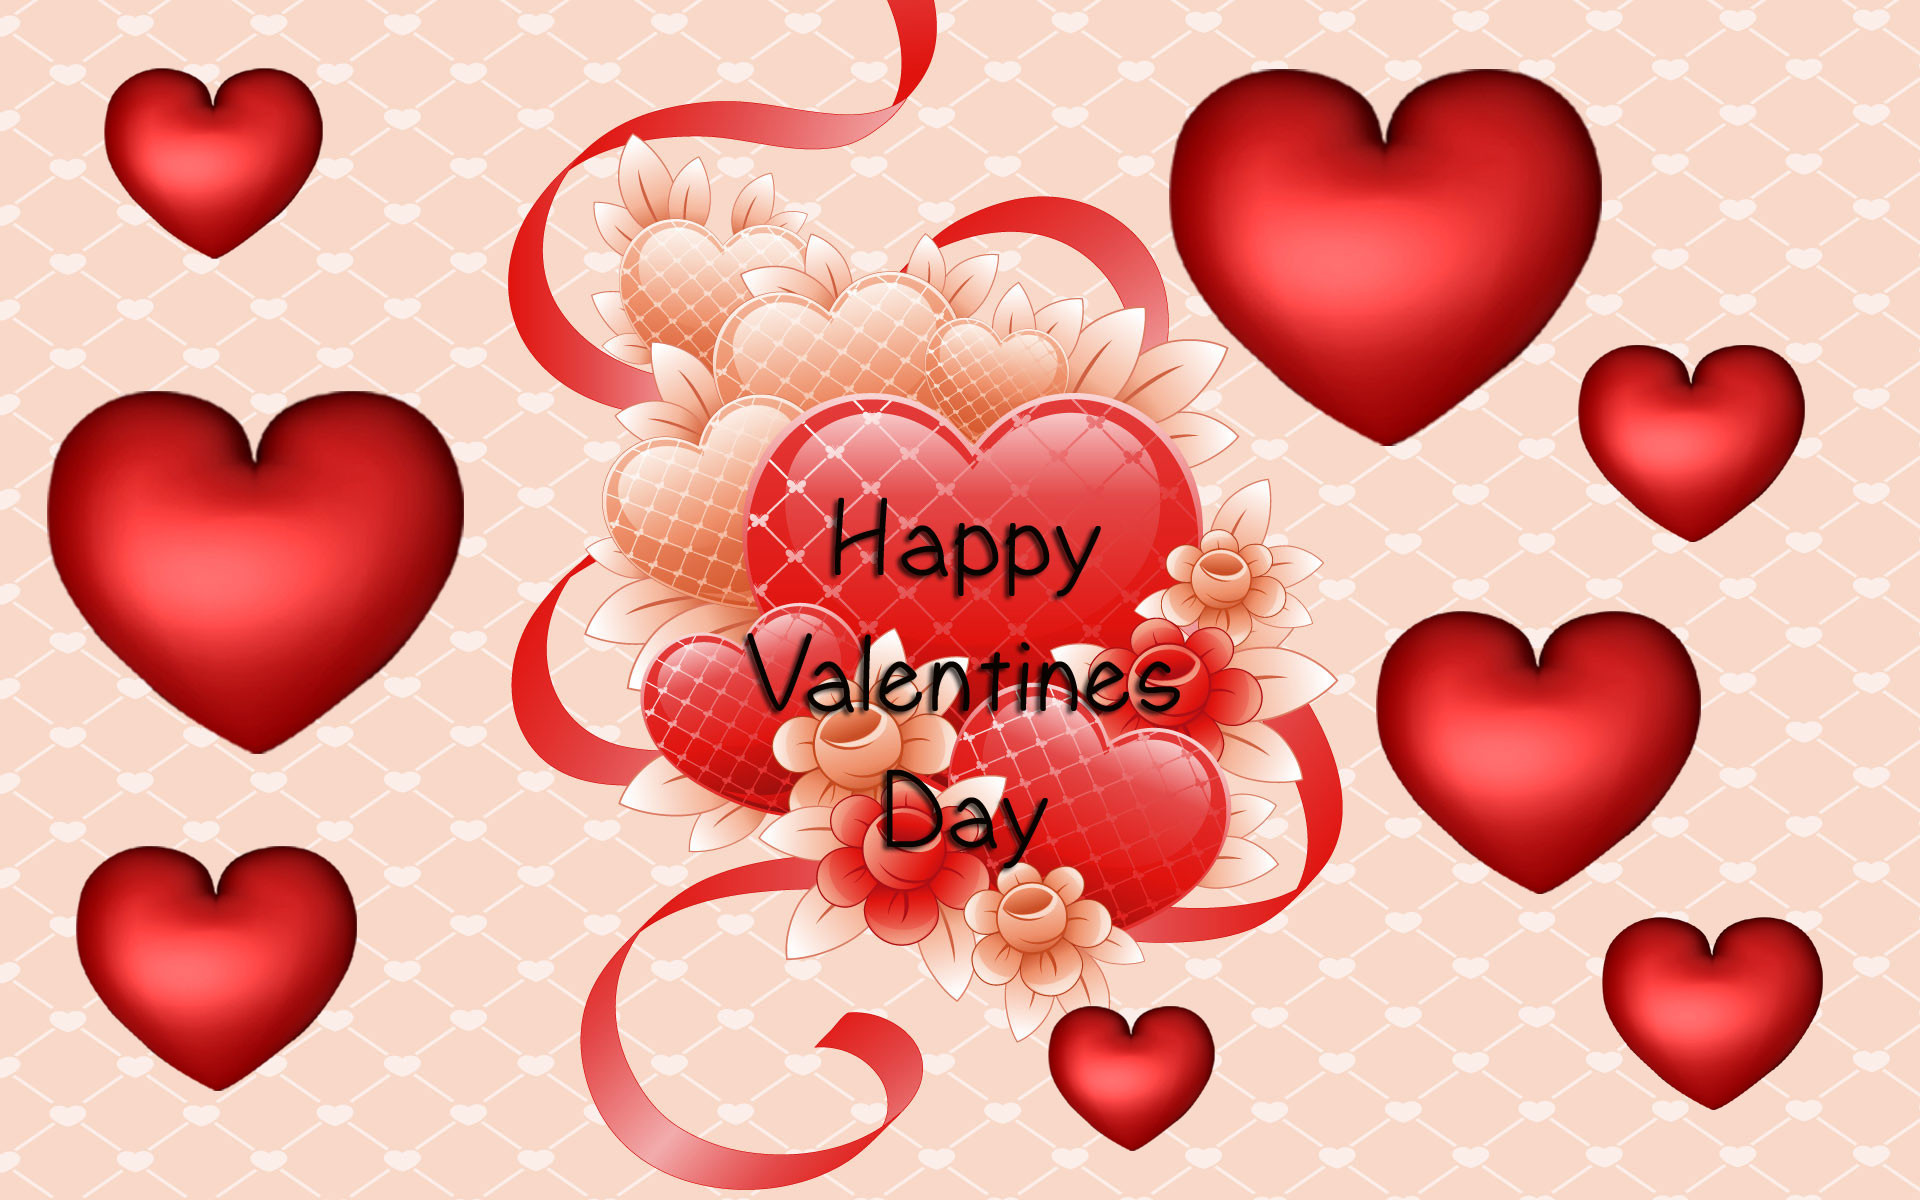 Free Valentines Day Desktop Wallpapers  Feel Love in the Air